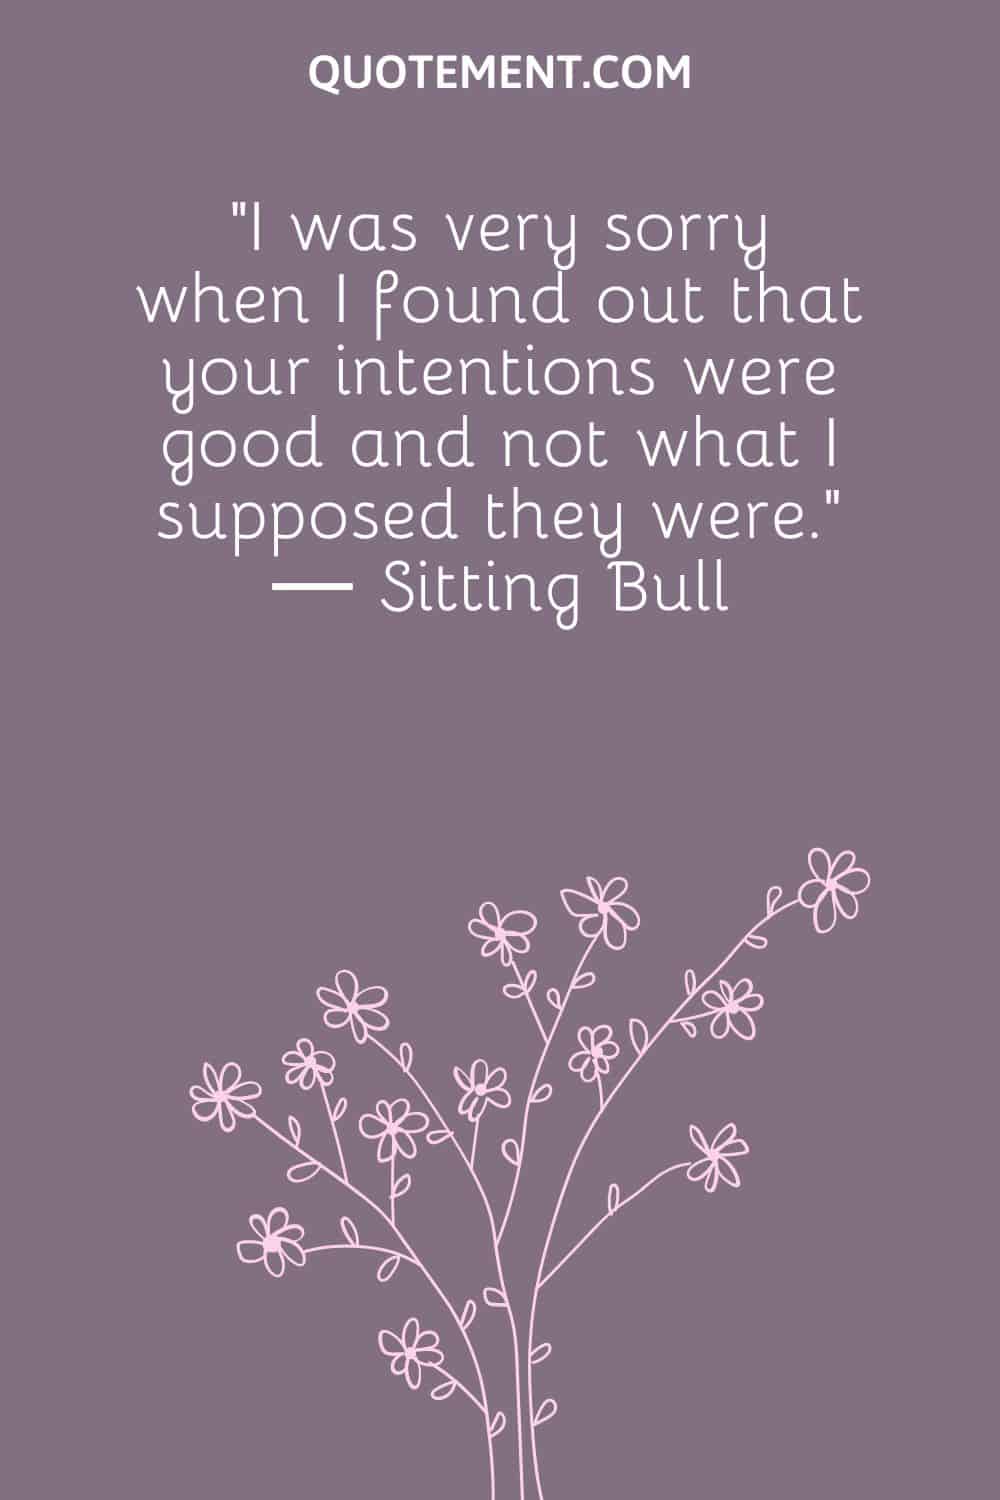 “I was very sorry when I found out that your intentions were good and not what I supposed they were.” ― Sitting Bull